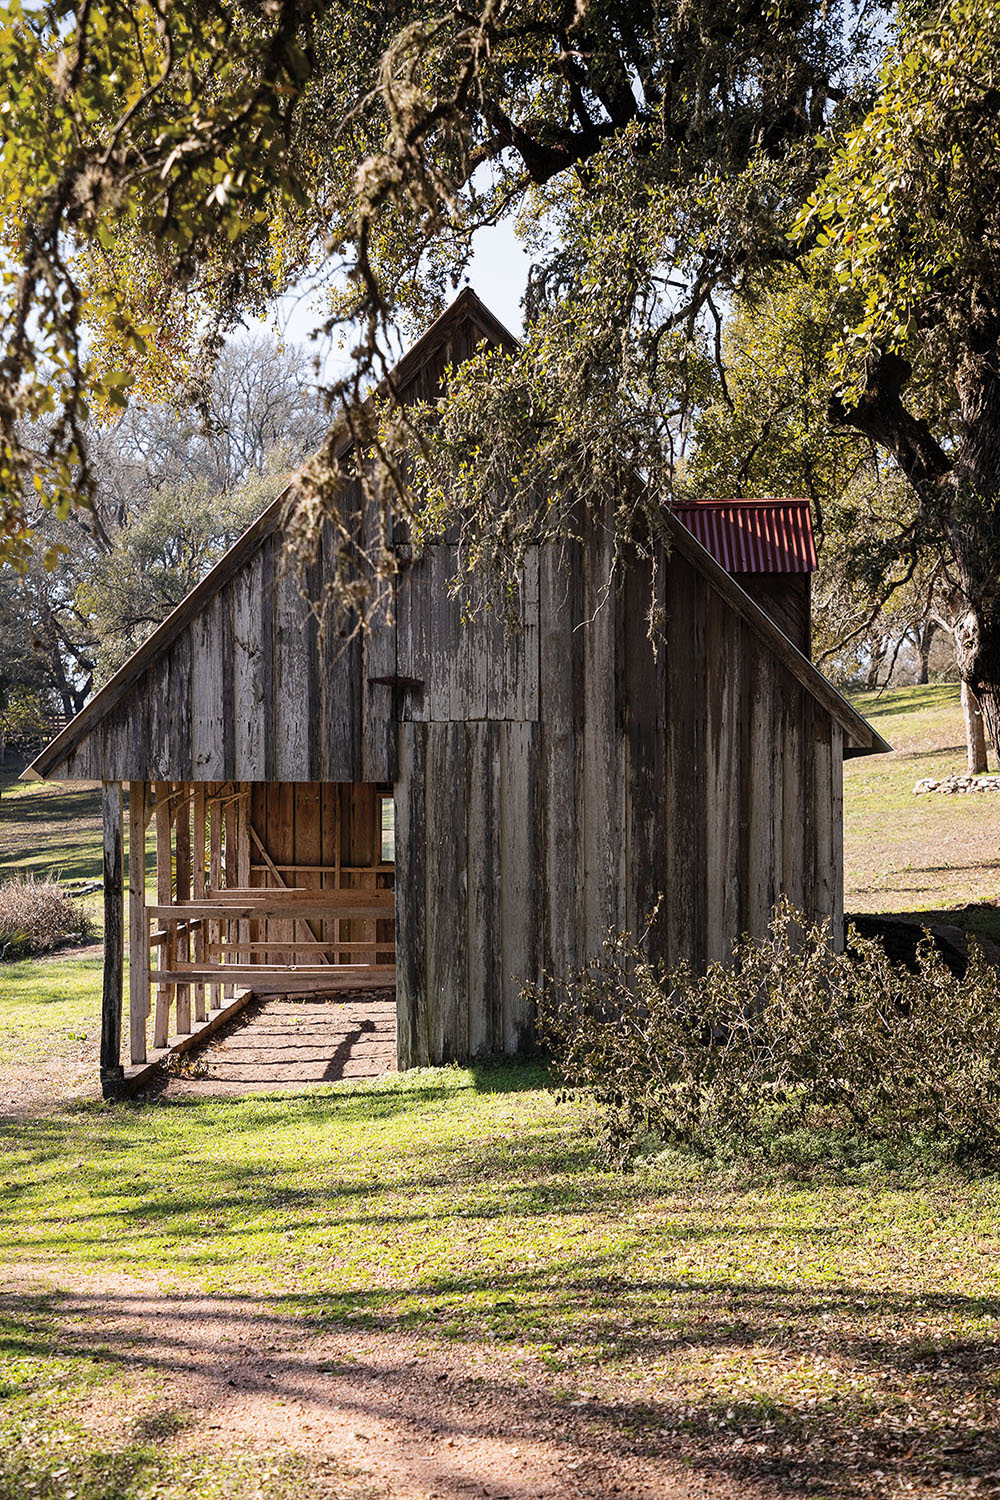 The exterior of a wooden barn and green grass